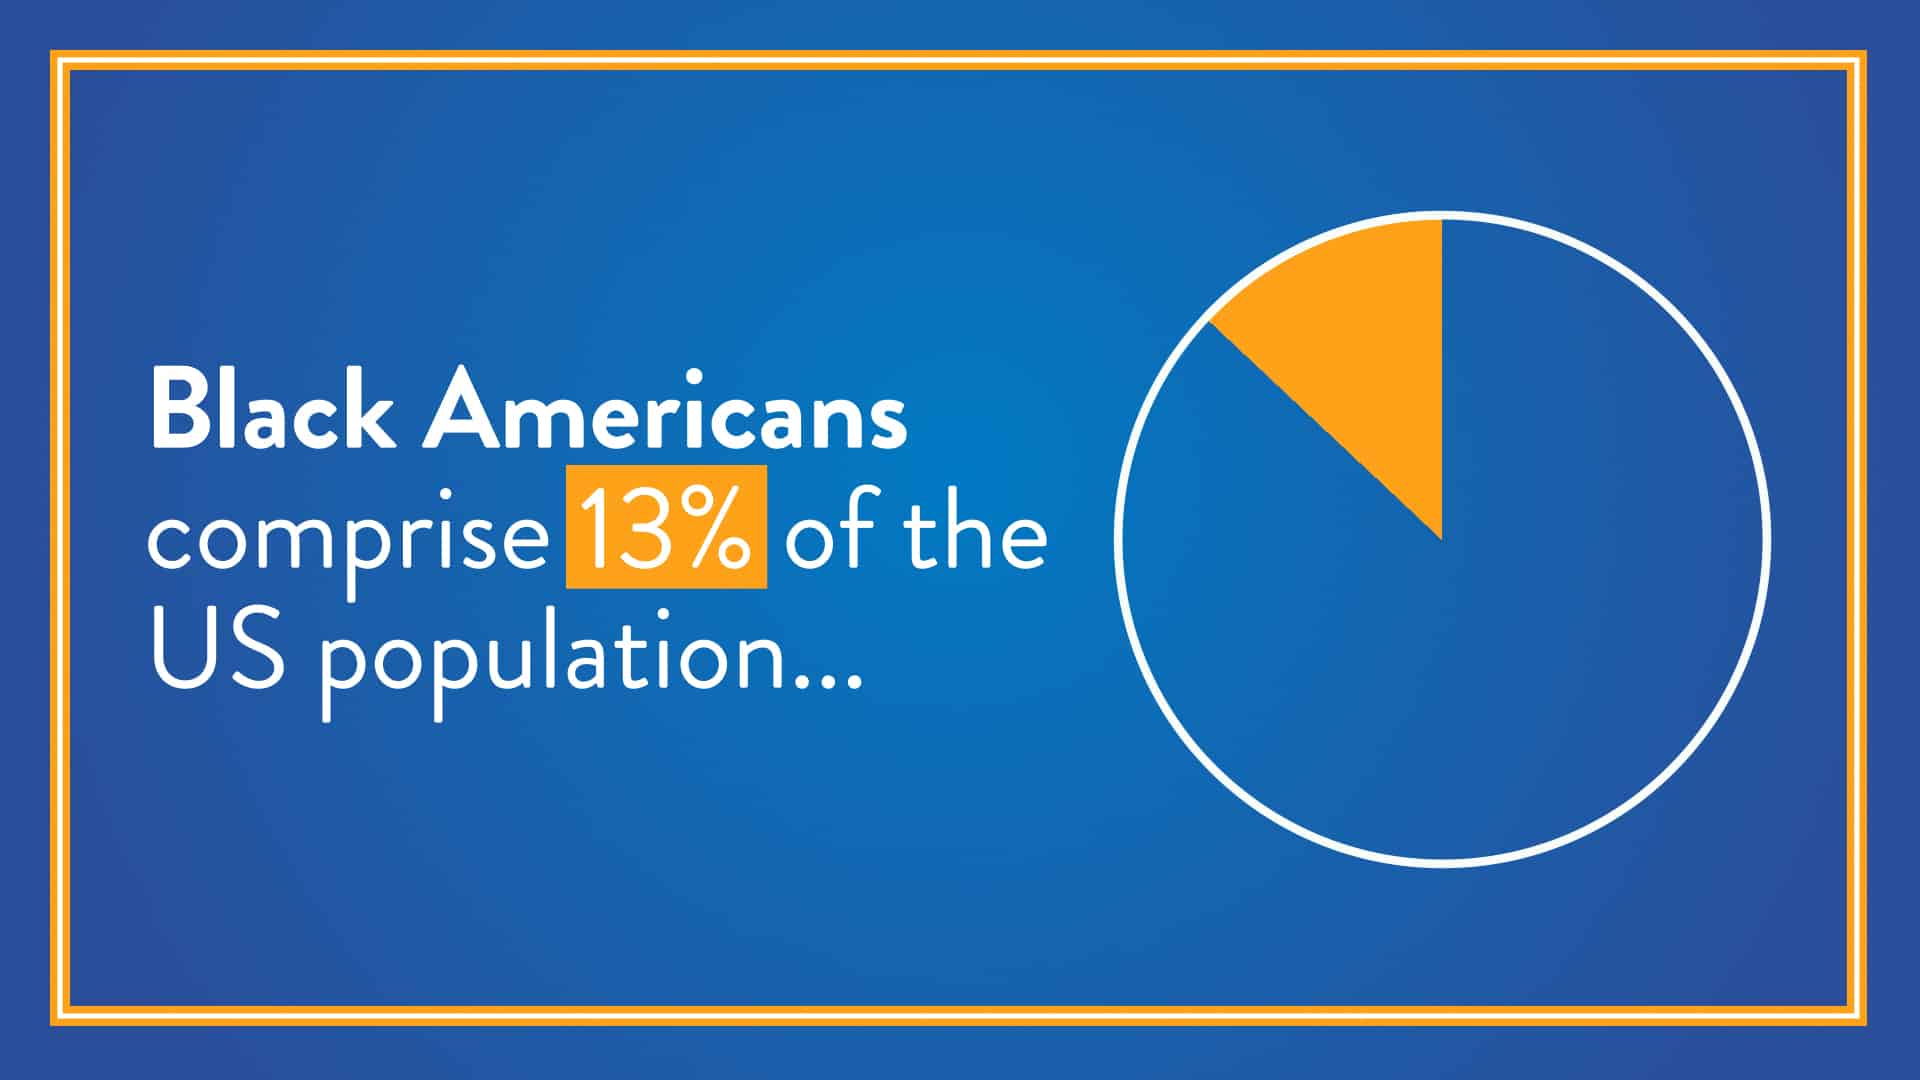 Fast Facts: 13% of population but 33% of those living on dialysis